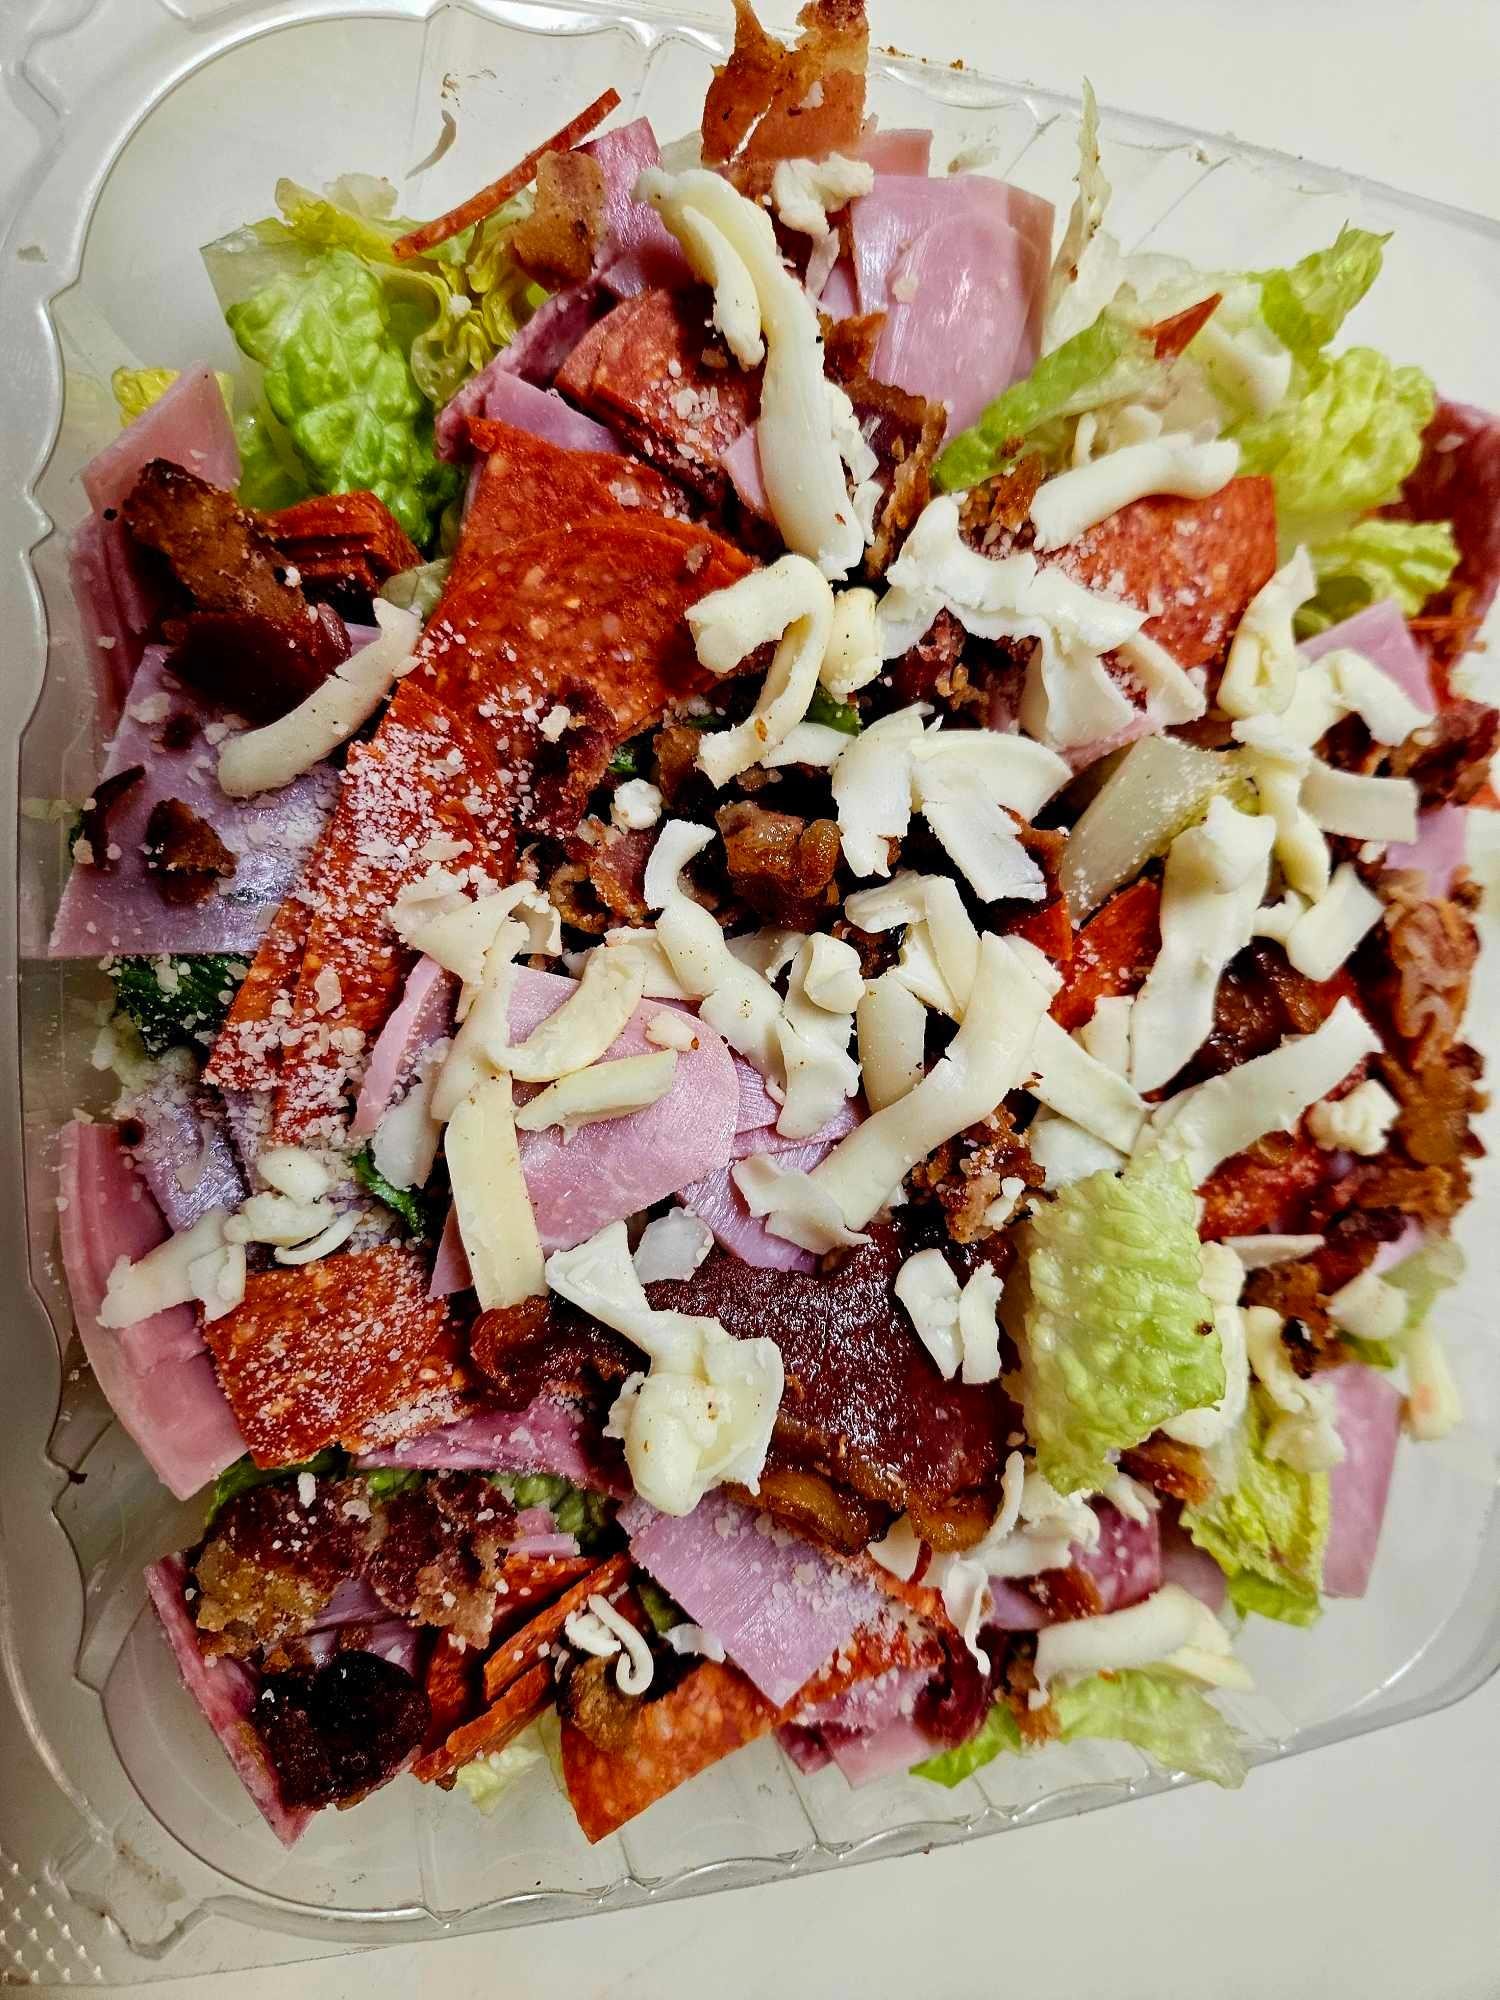 MEAT LOVERS SALAD